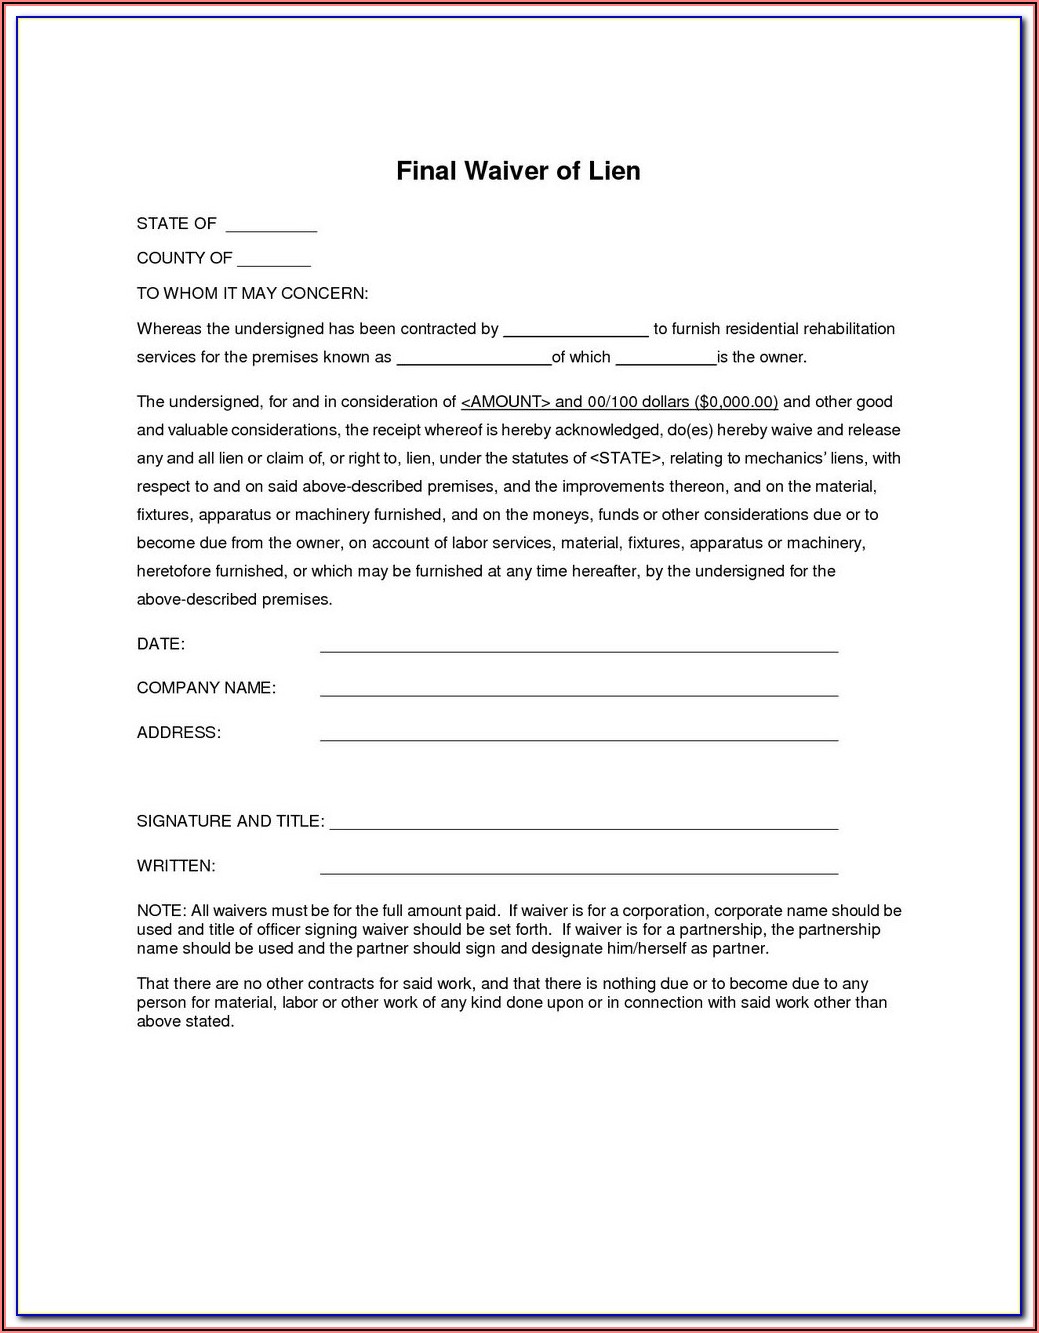 Partial Lien Waiver Form New York